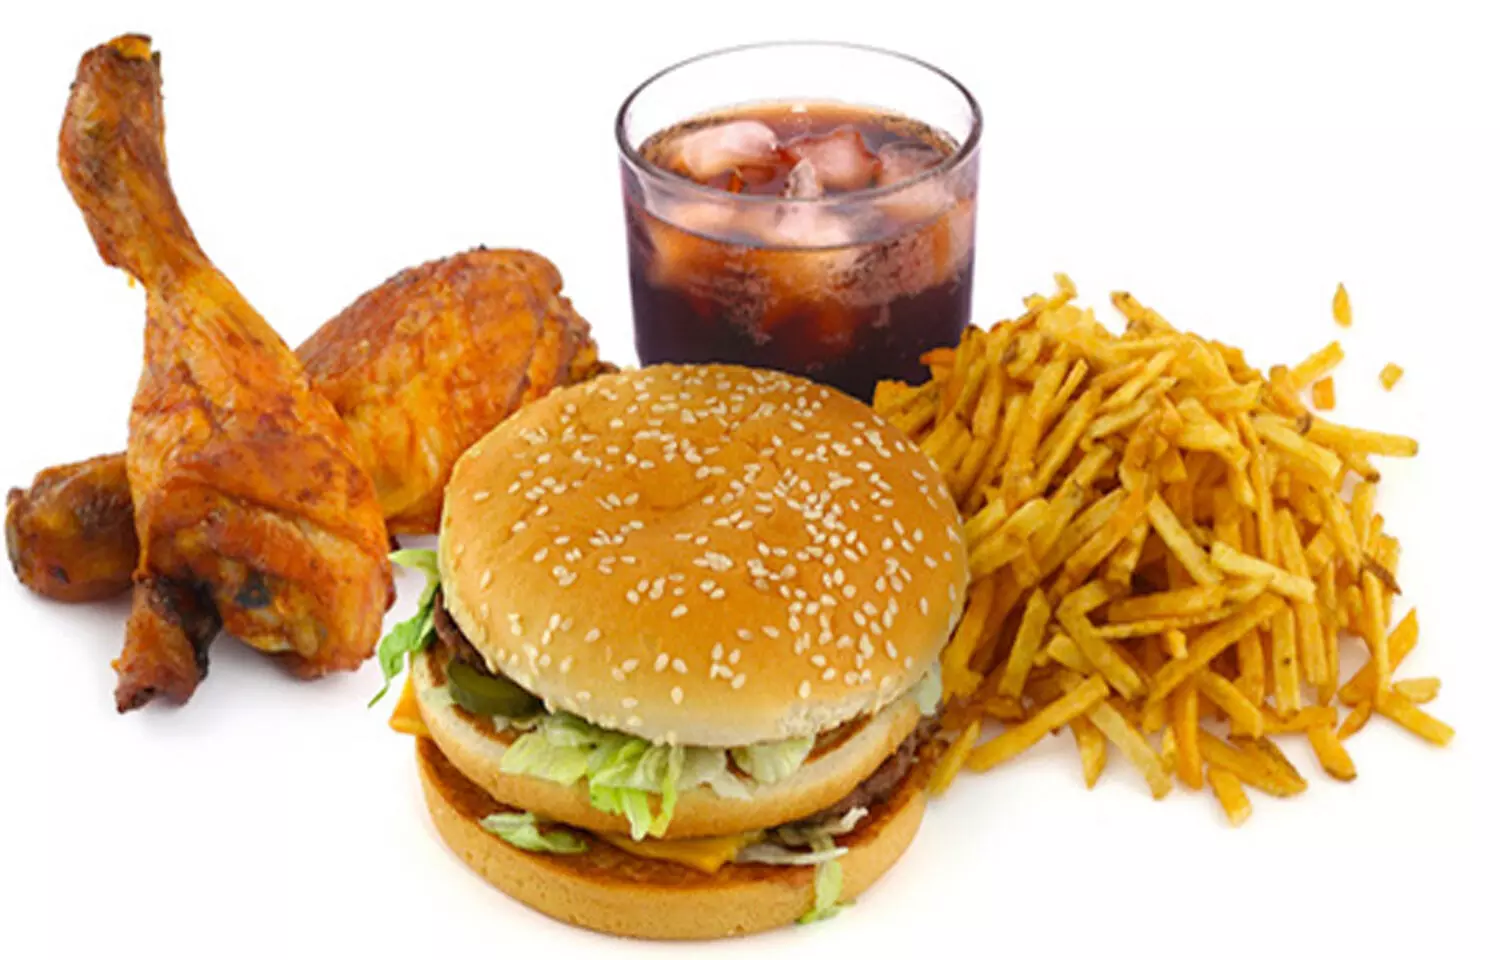 Sugary drinks and processed foods may damage immune system, finds study